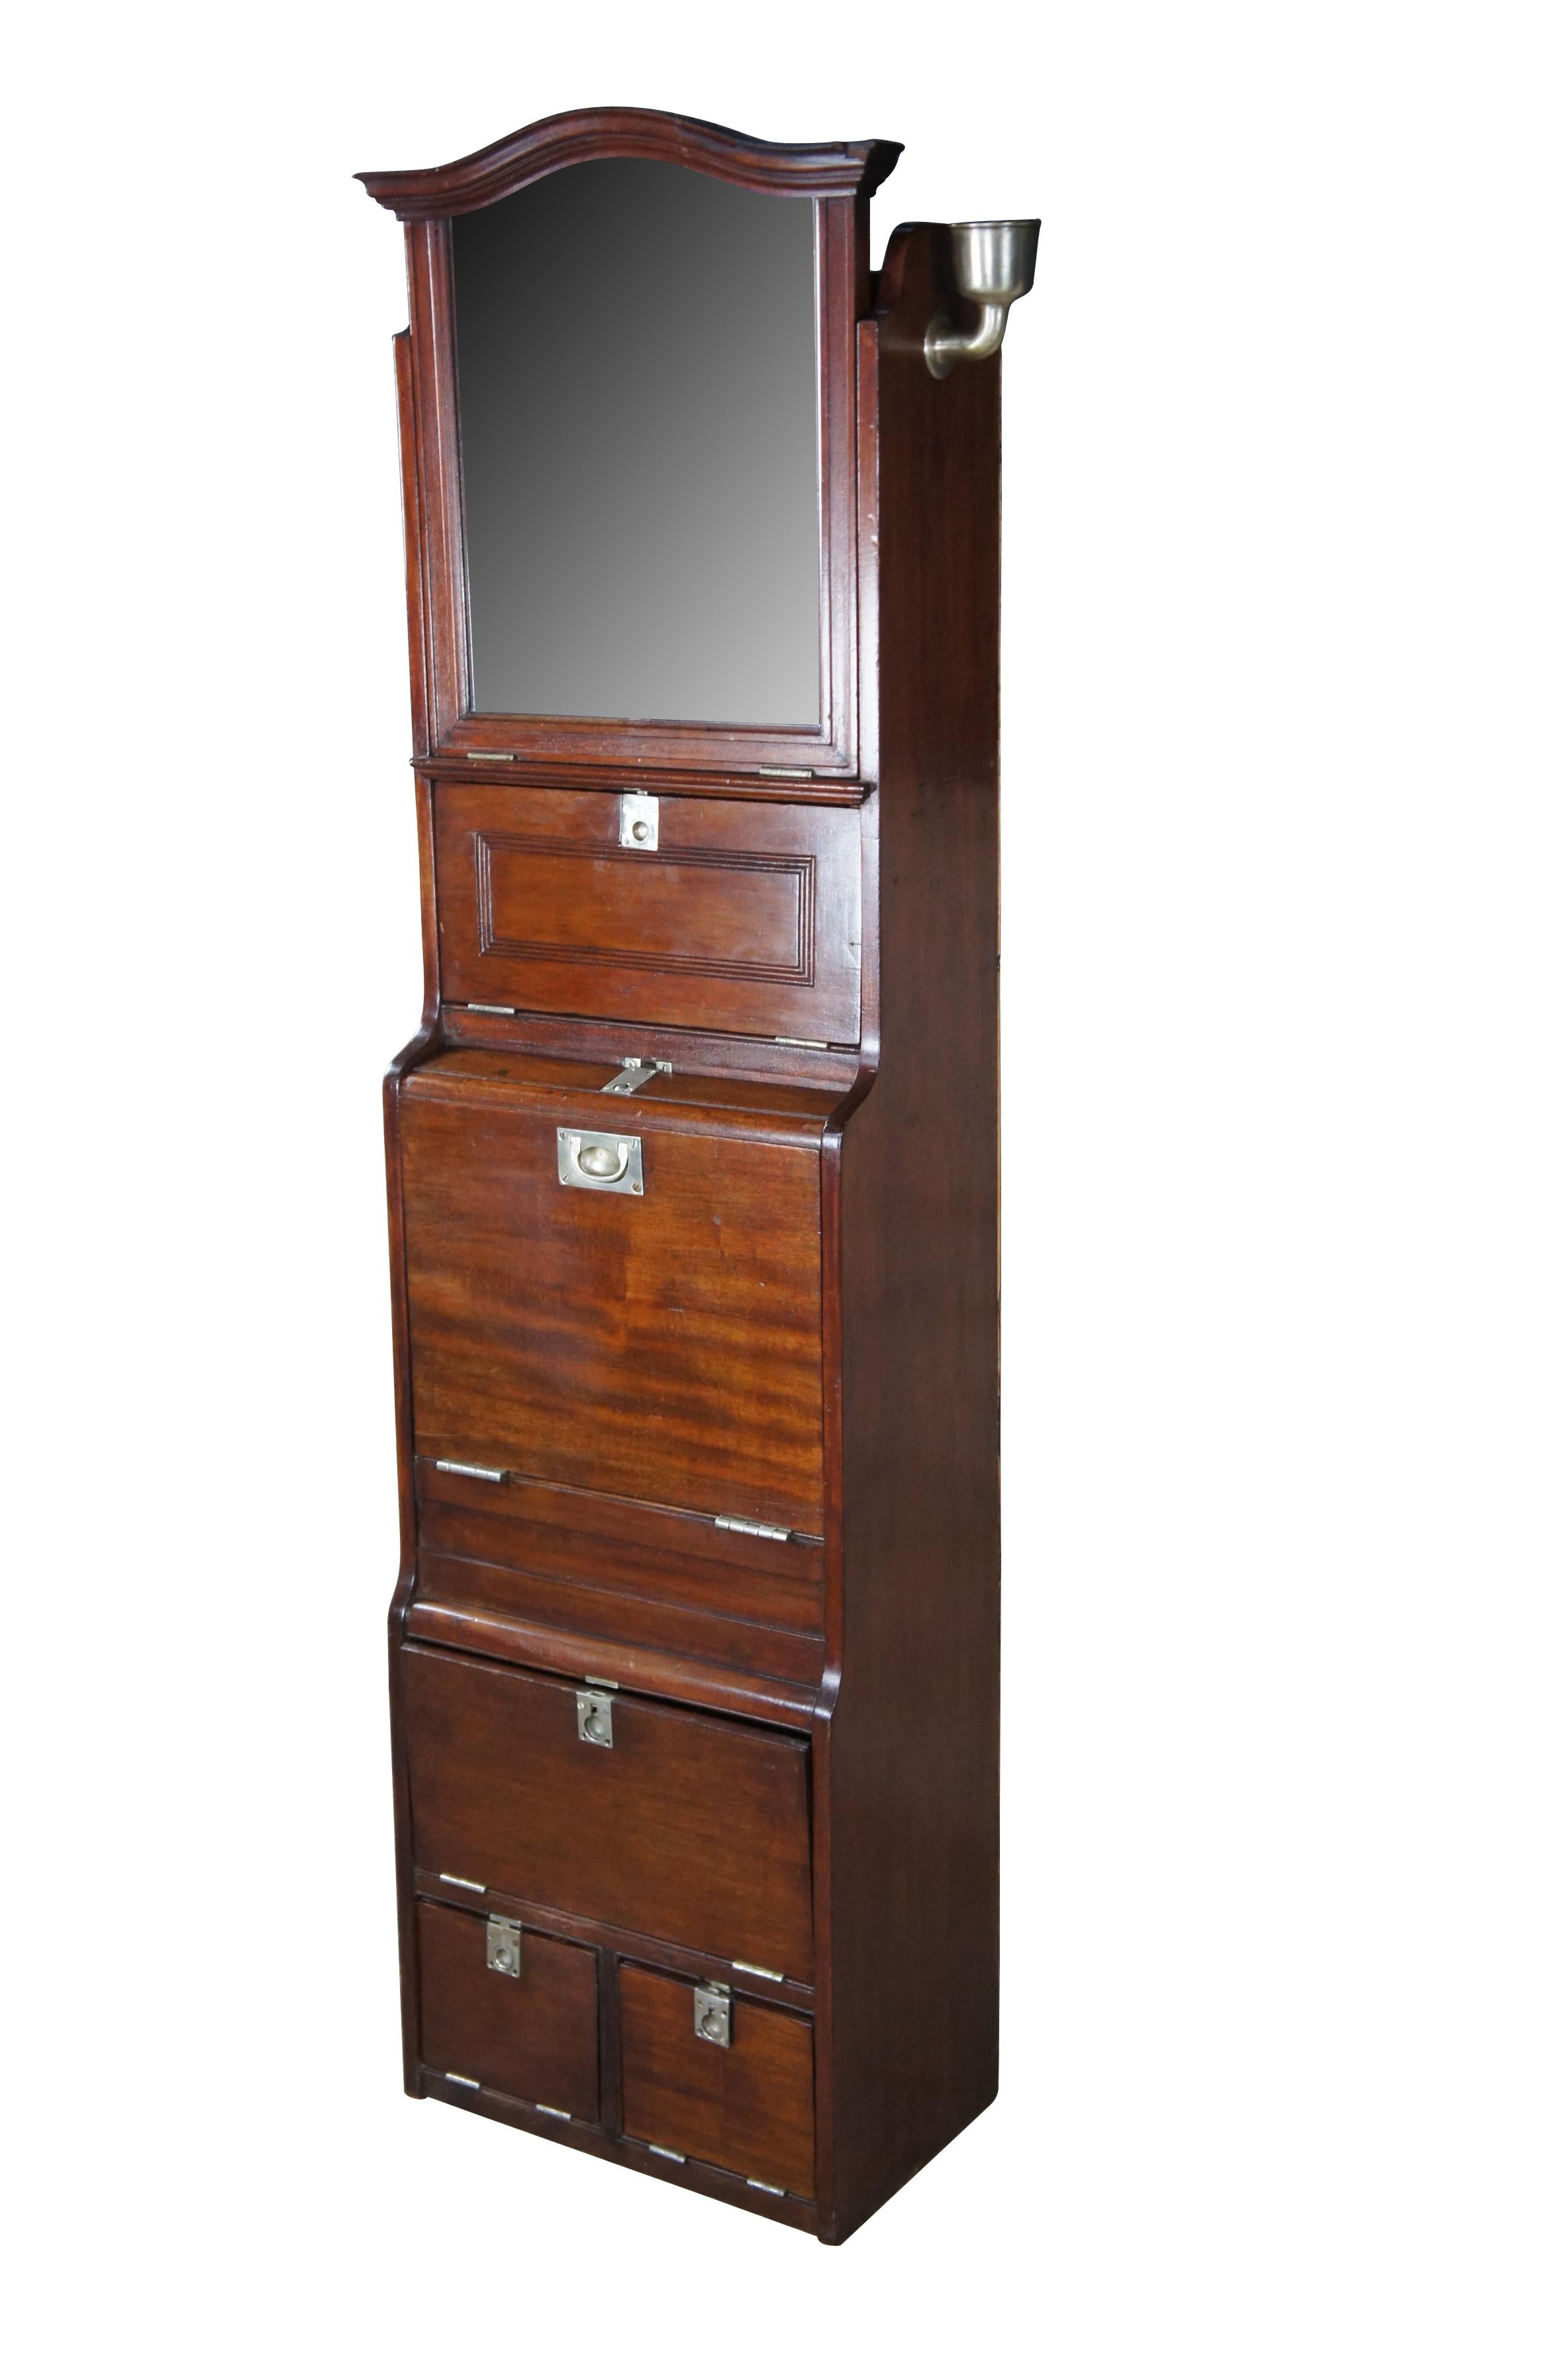 Antique nautical maritime boat / ship / steamship first class cloakroom compactum cabinet with porcelain wash basin and extras.  Made of mahogany featuring overhead adjustable mirror with multiple storage cabinets / cubbies.


Dimensions:
12.5